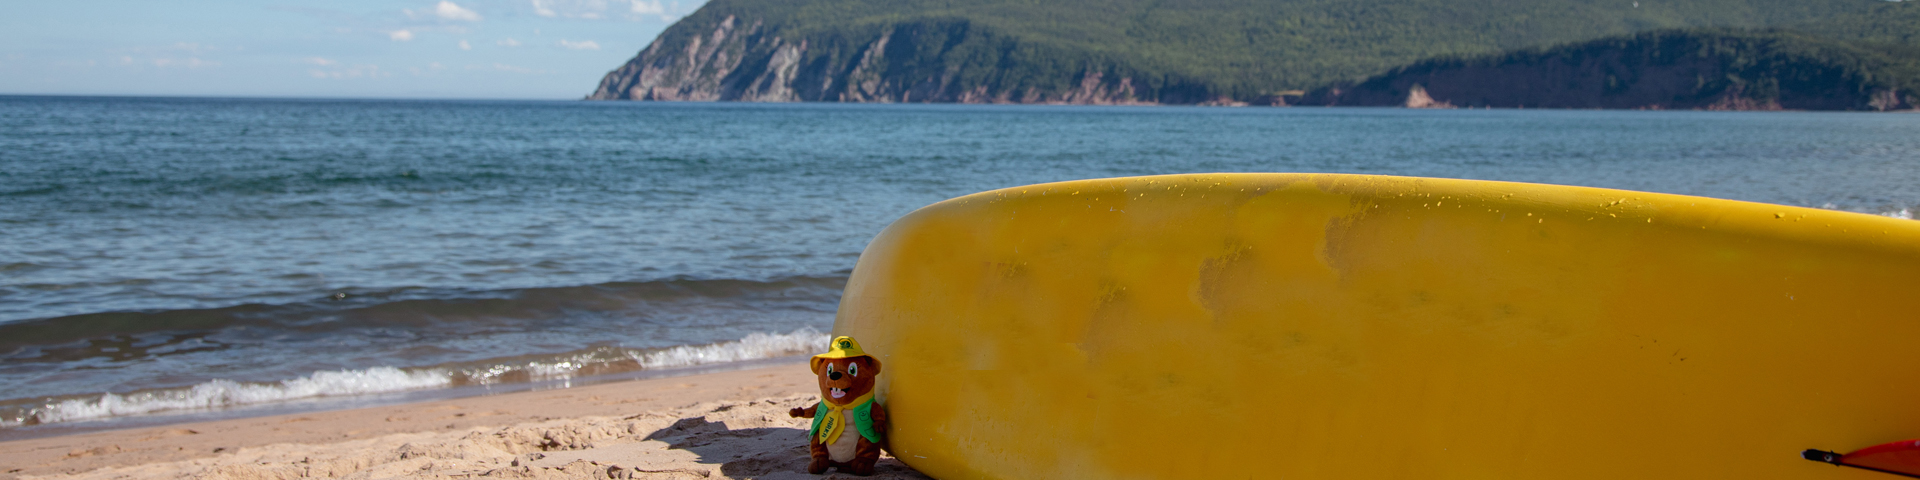 A beaver plush toy propped up against a yellow and red surf board